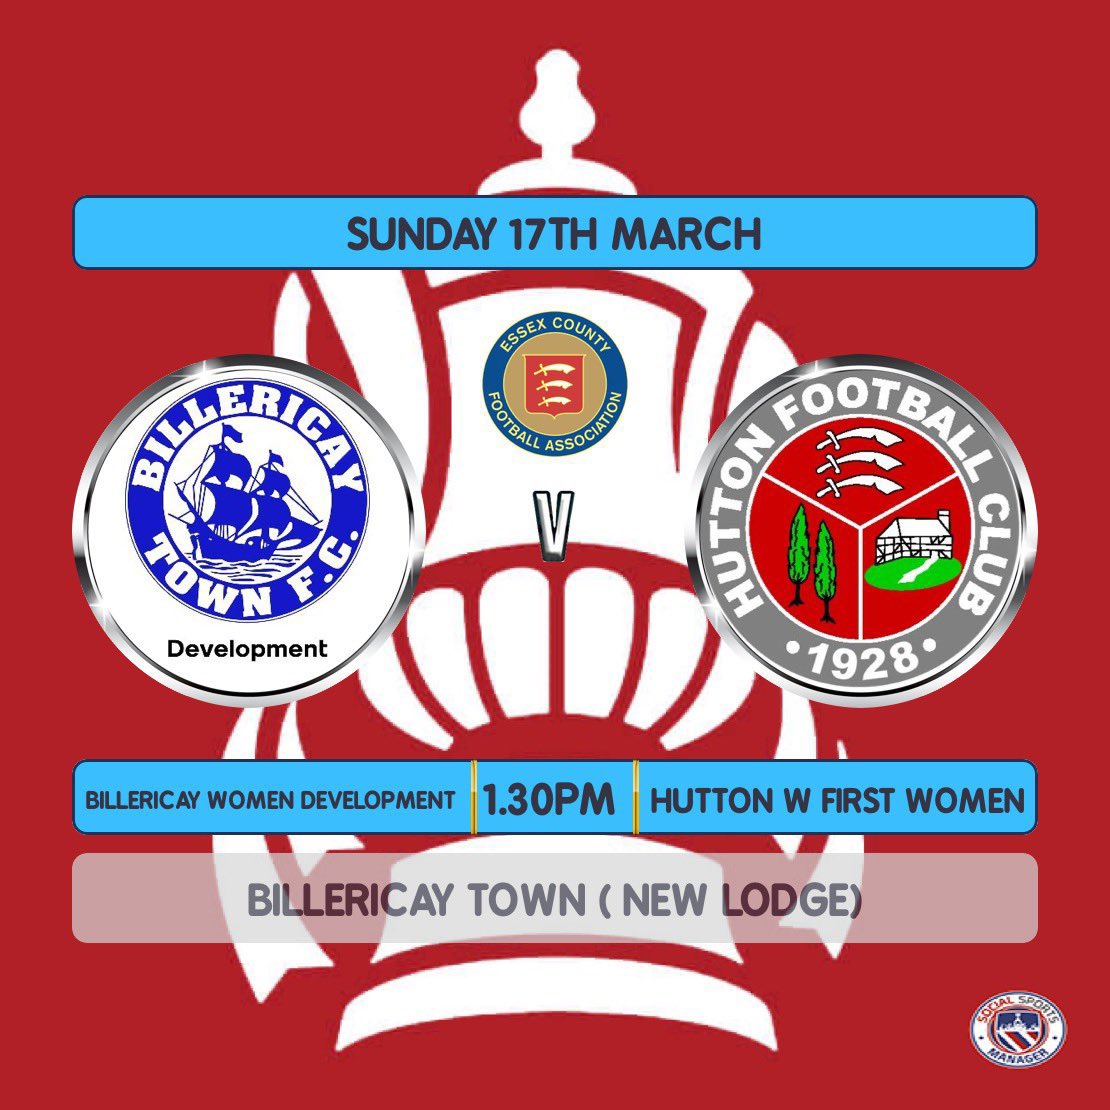 With our mens 1st team playing there today, our ladies side are also playing at @BTFC tomorrow, in a semi final #neighbours 🔴⚪️ #upthetons